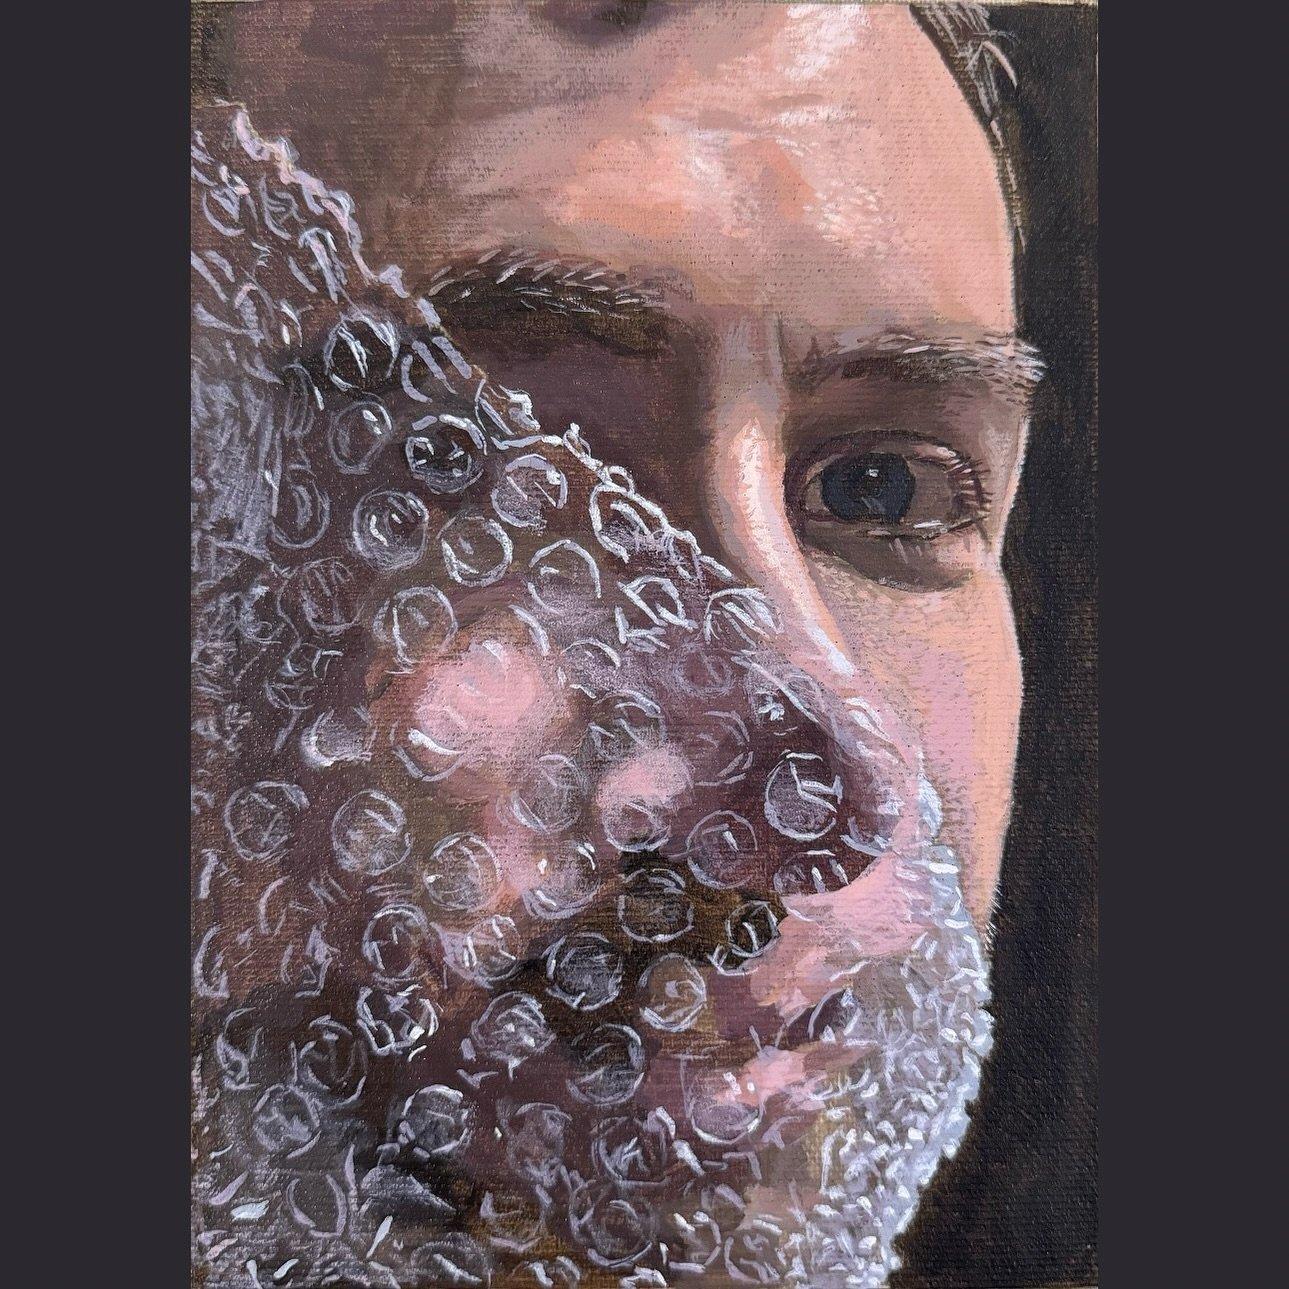 &ldquo;In my bubble&rdquo;. Small acrylic study with bubble wrap. Started this afternoon and planned to do tomorrow but I think I&rsquo;m finished early! #portraitpainting #acrylicpainting #bubblepops